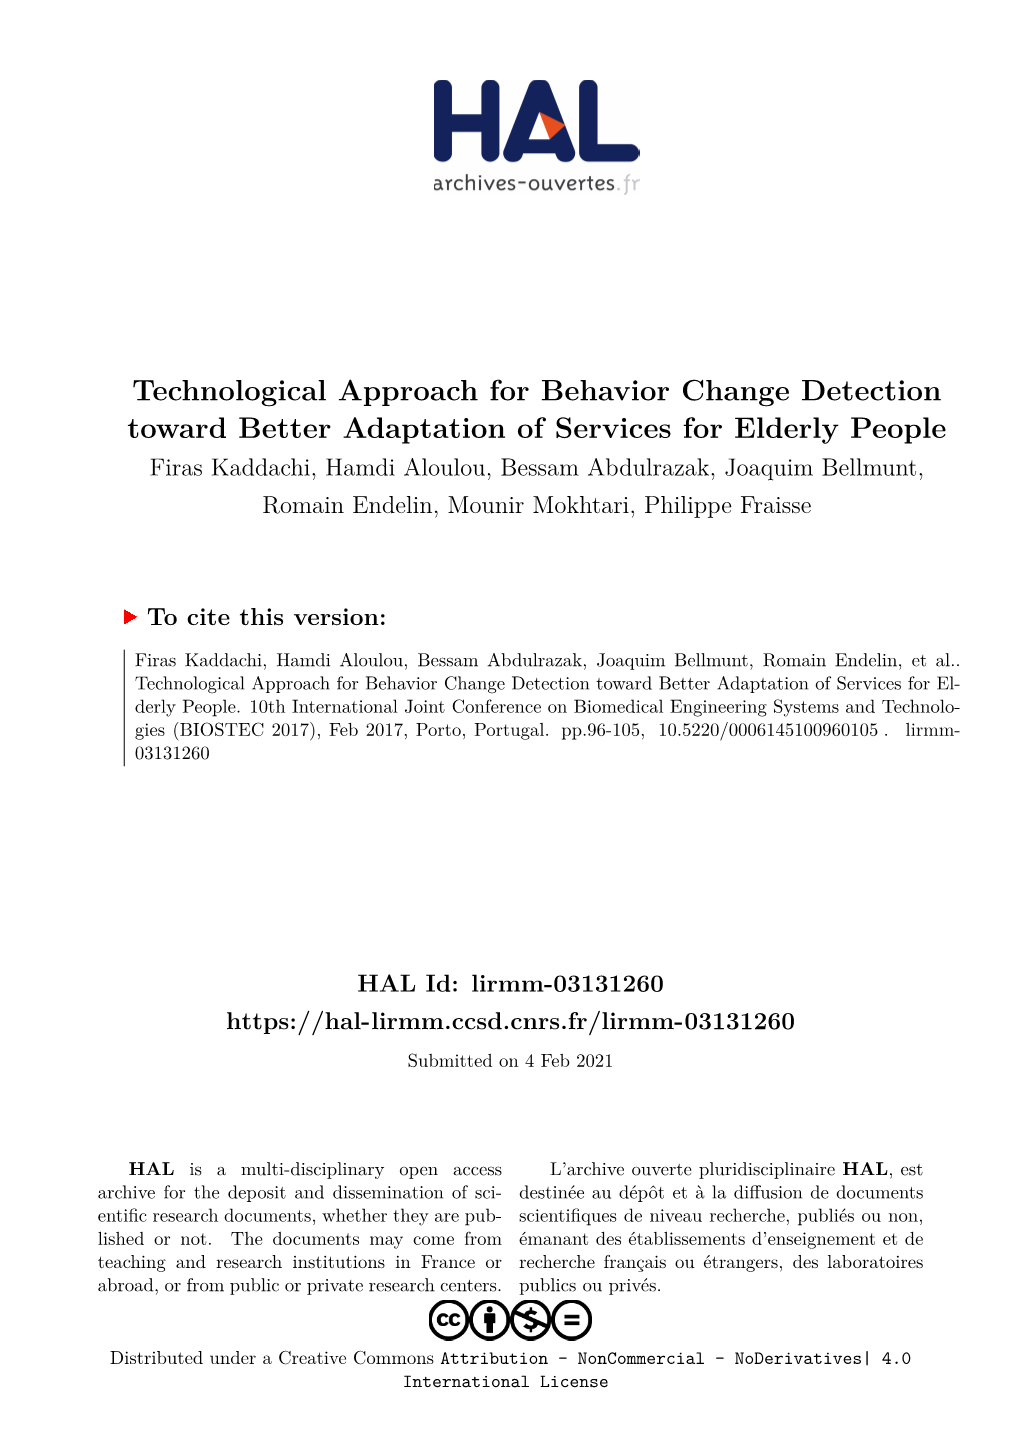 Technological Approach for Behavior Change Detection Toward Better Adaptation of Services for Elderly People